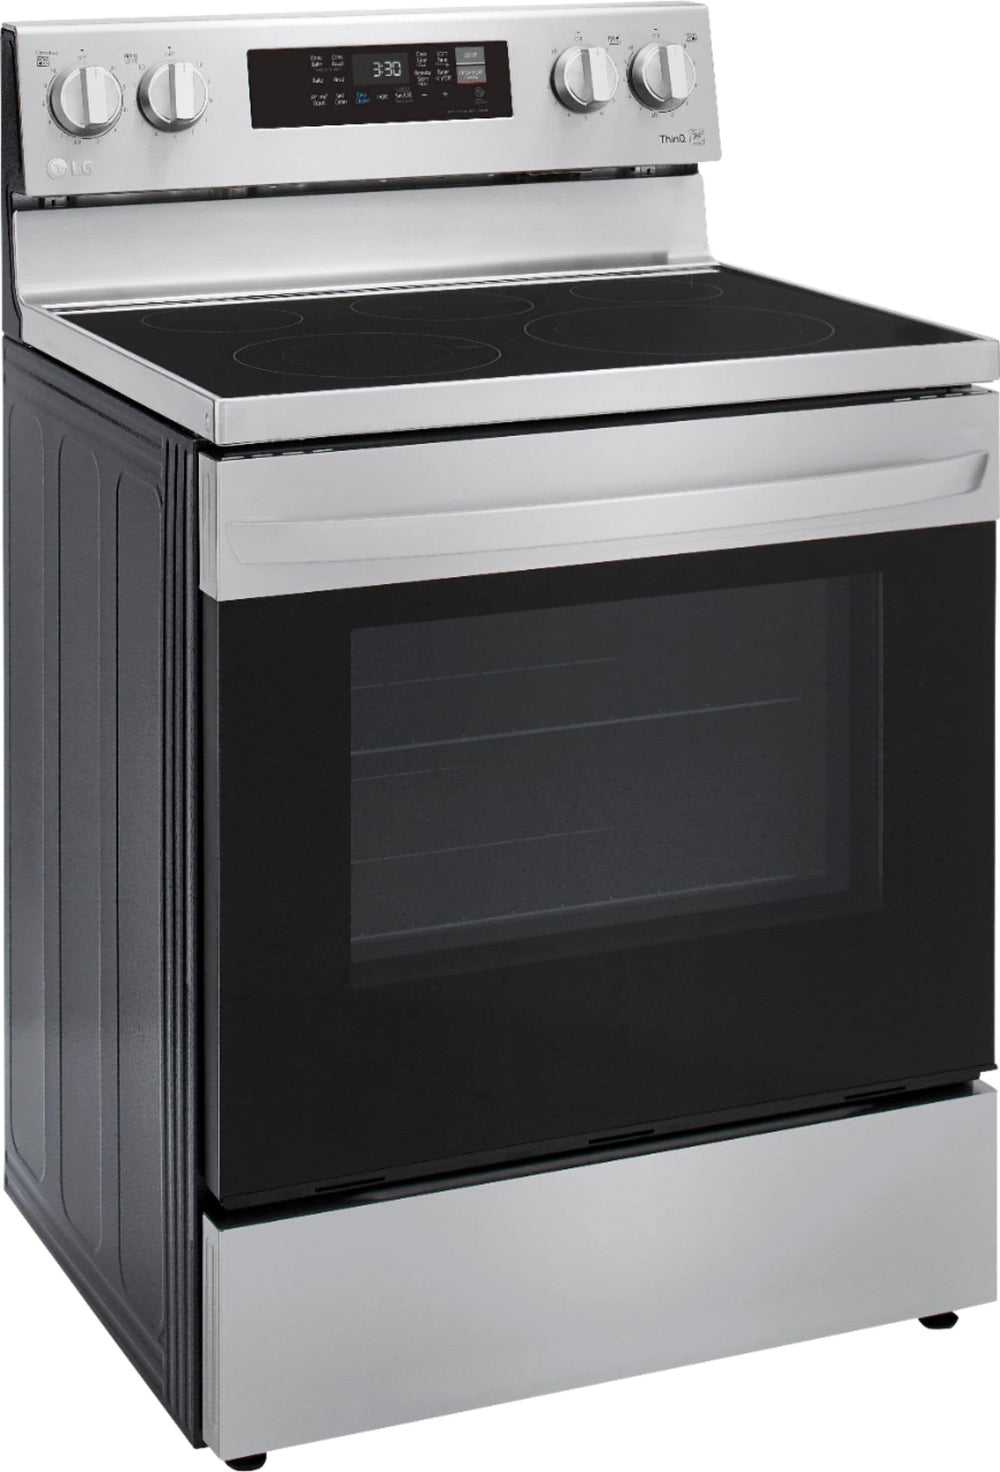 LG - 6.3 Cu. Ft. Smart Freestanding Electric Convection Range with EasyClean, Air Fry and InstaView - Stainless steel_1